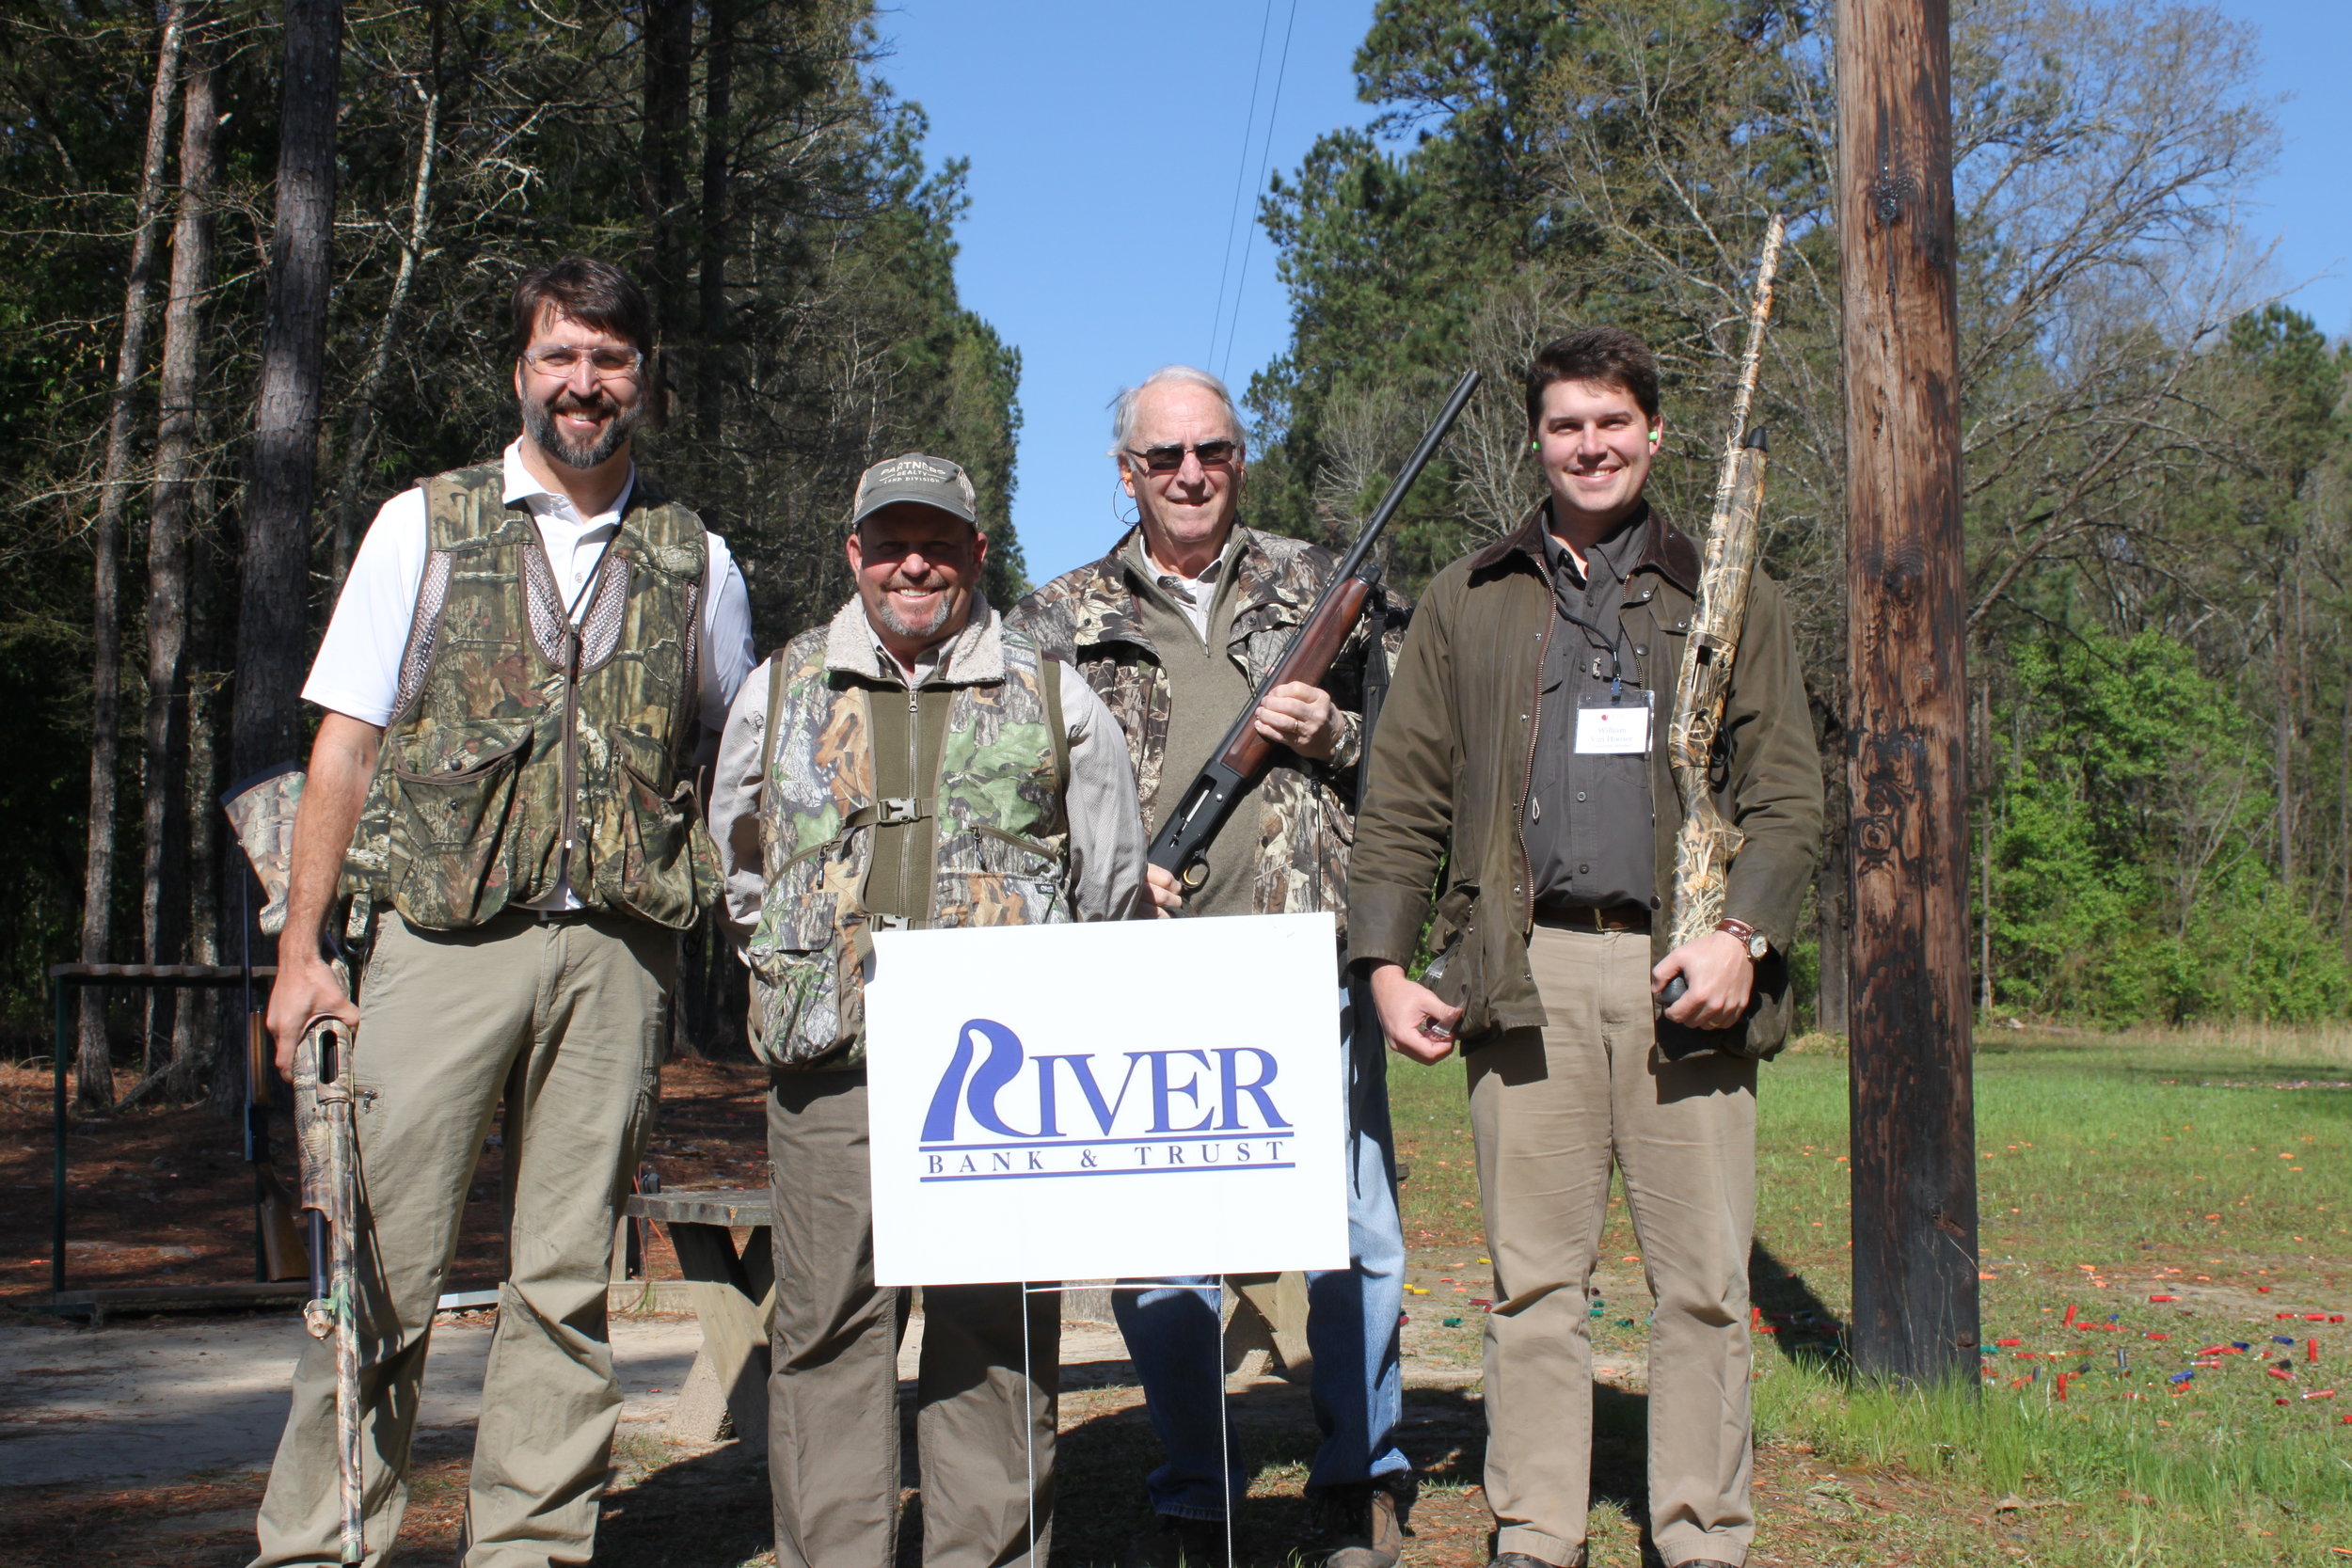  Chris Carver and the River Bank and Trust team support  CEF®  of Central Alabama Summer Missions at the Good News Clay Shoot.    